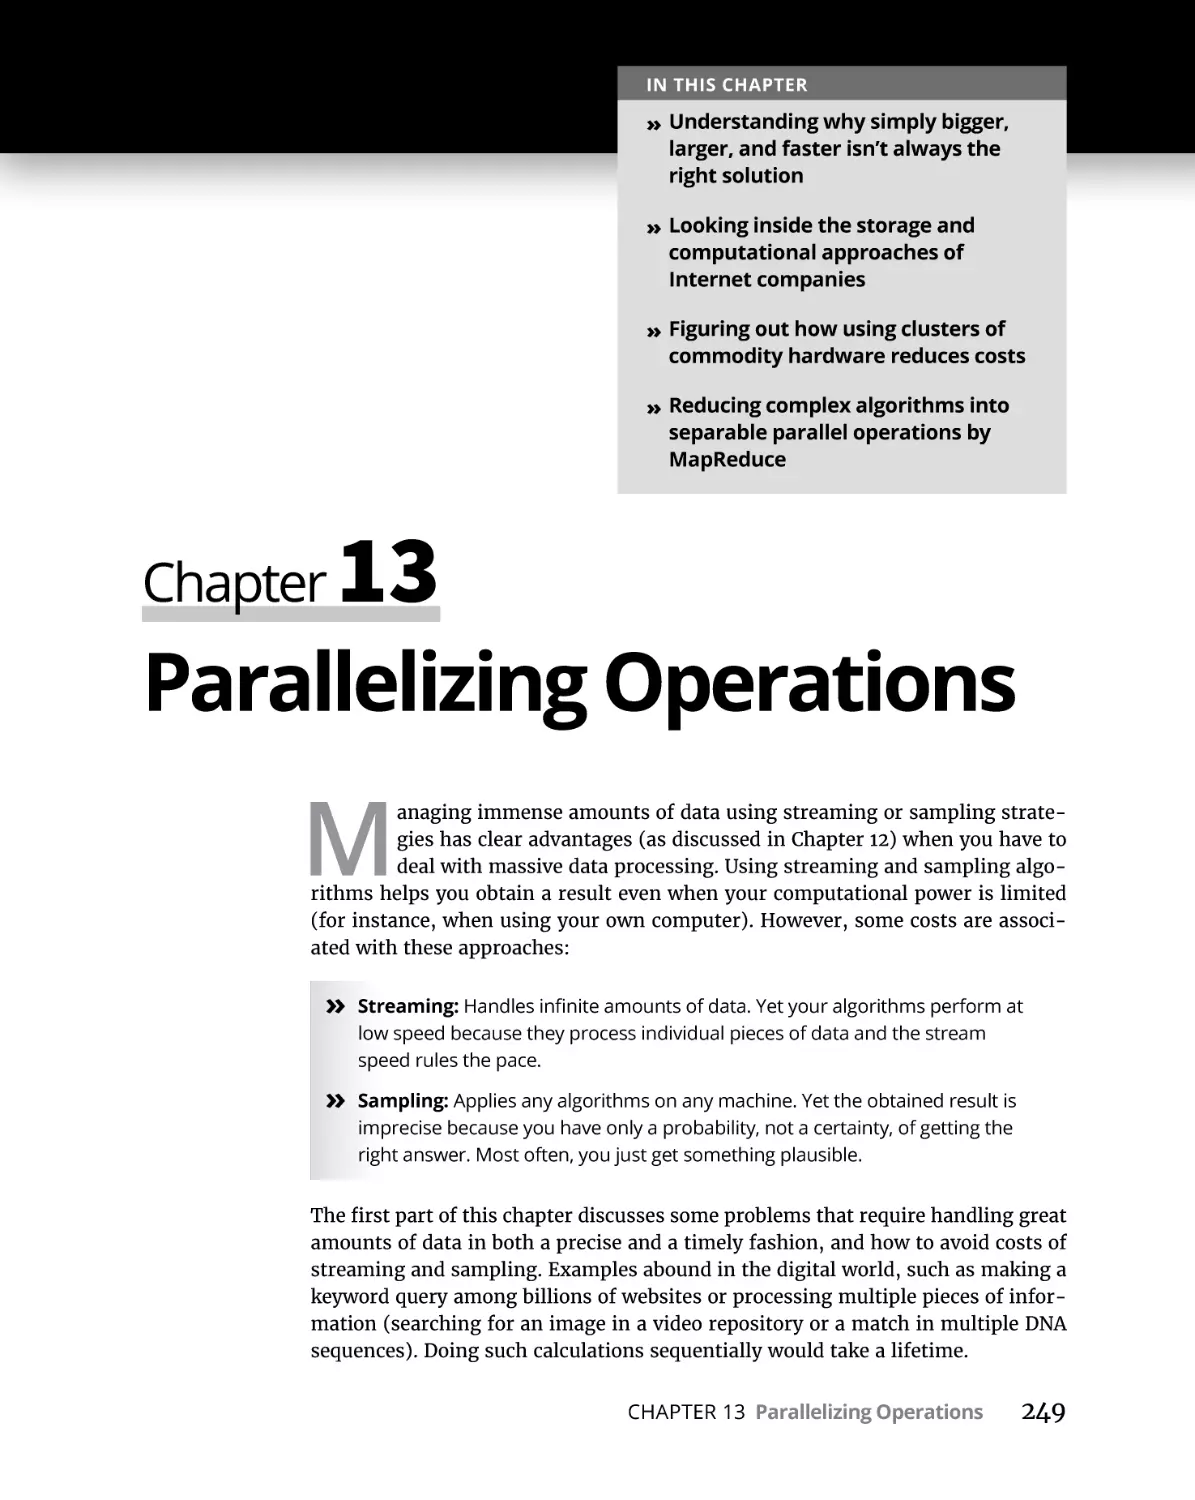 Chapter 13 Parallelizing Operations